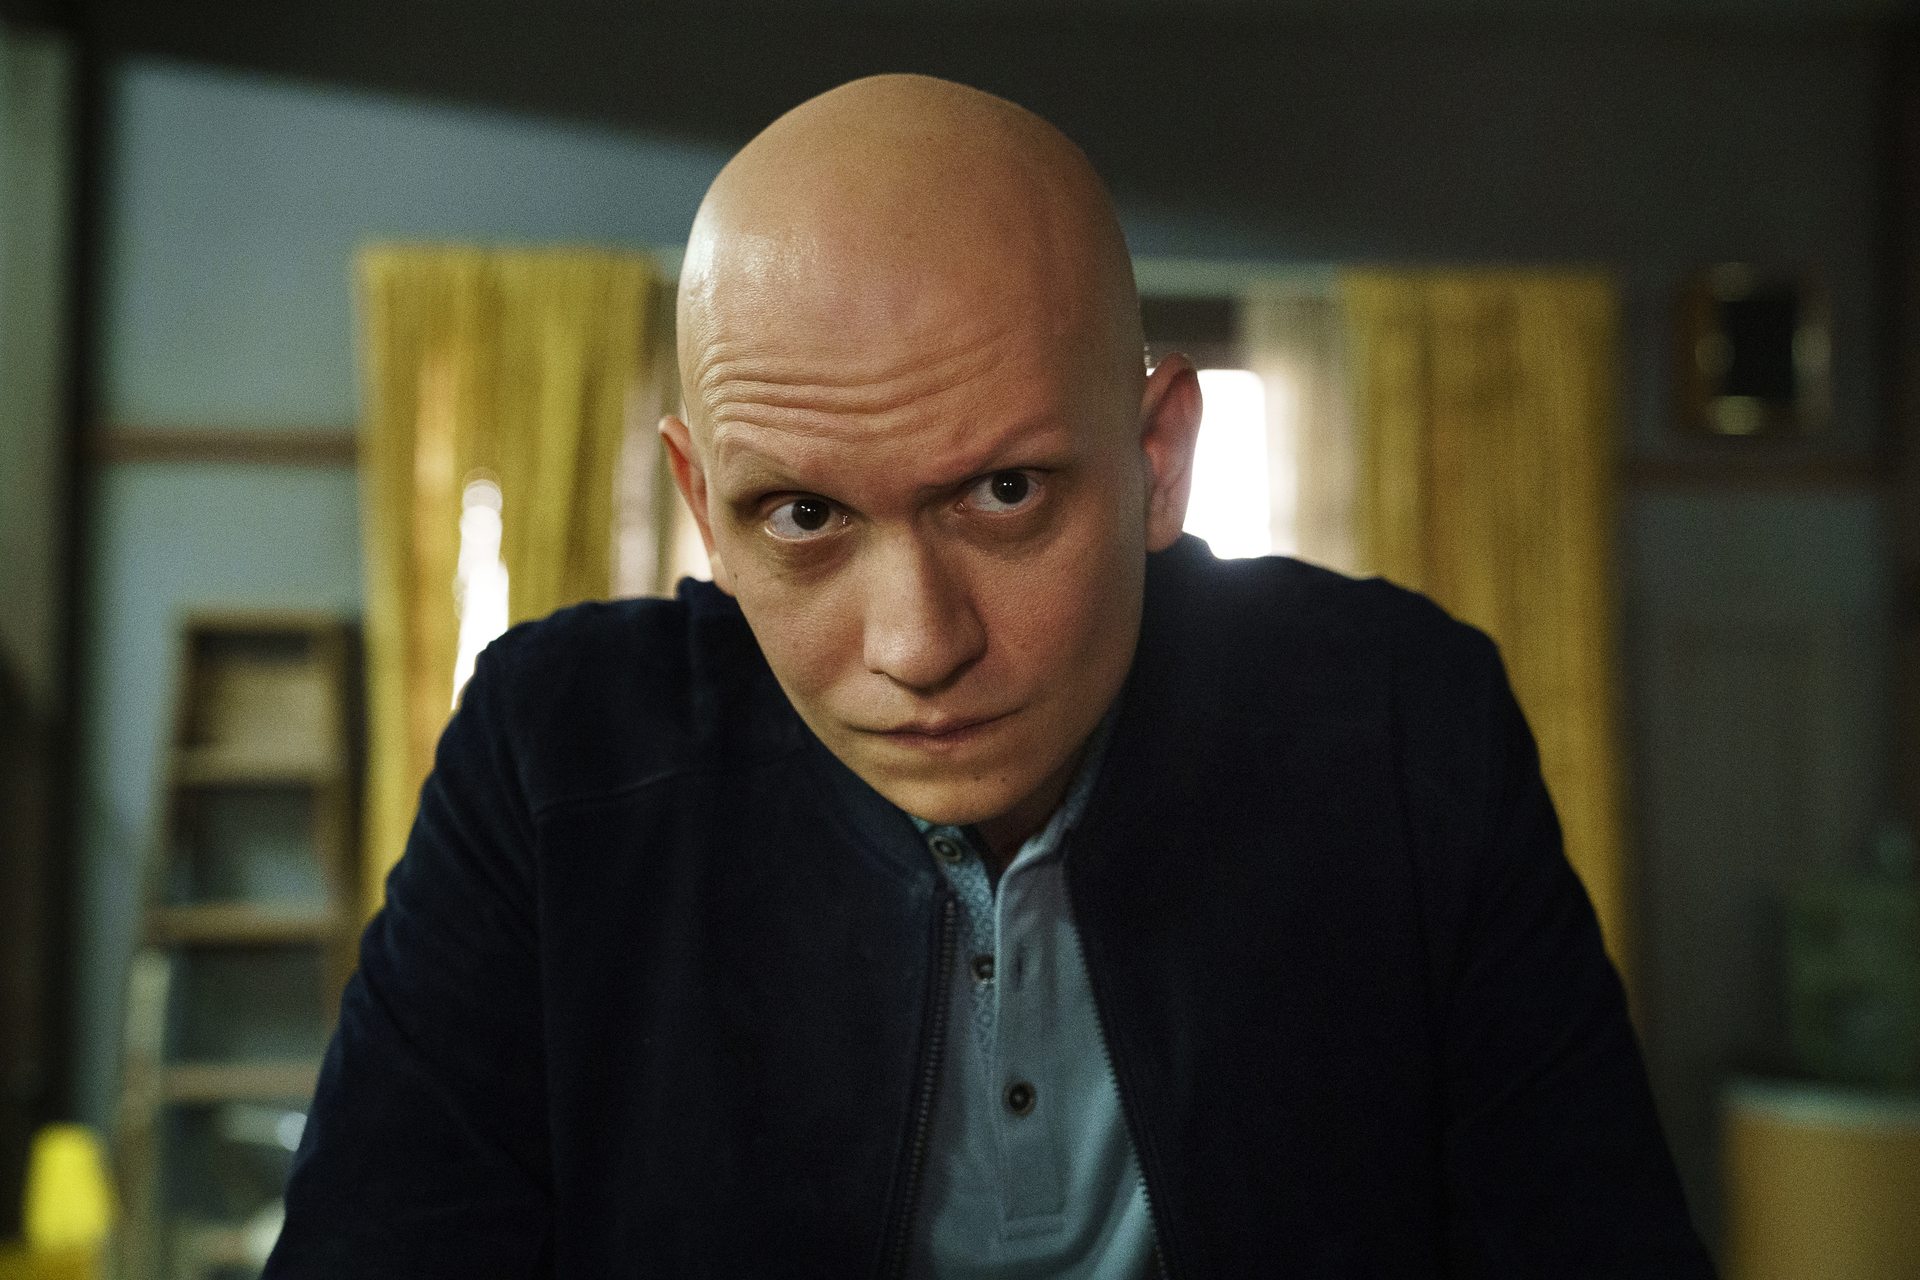 This is an image of Anthony Carrigan from Barry. 